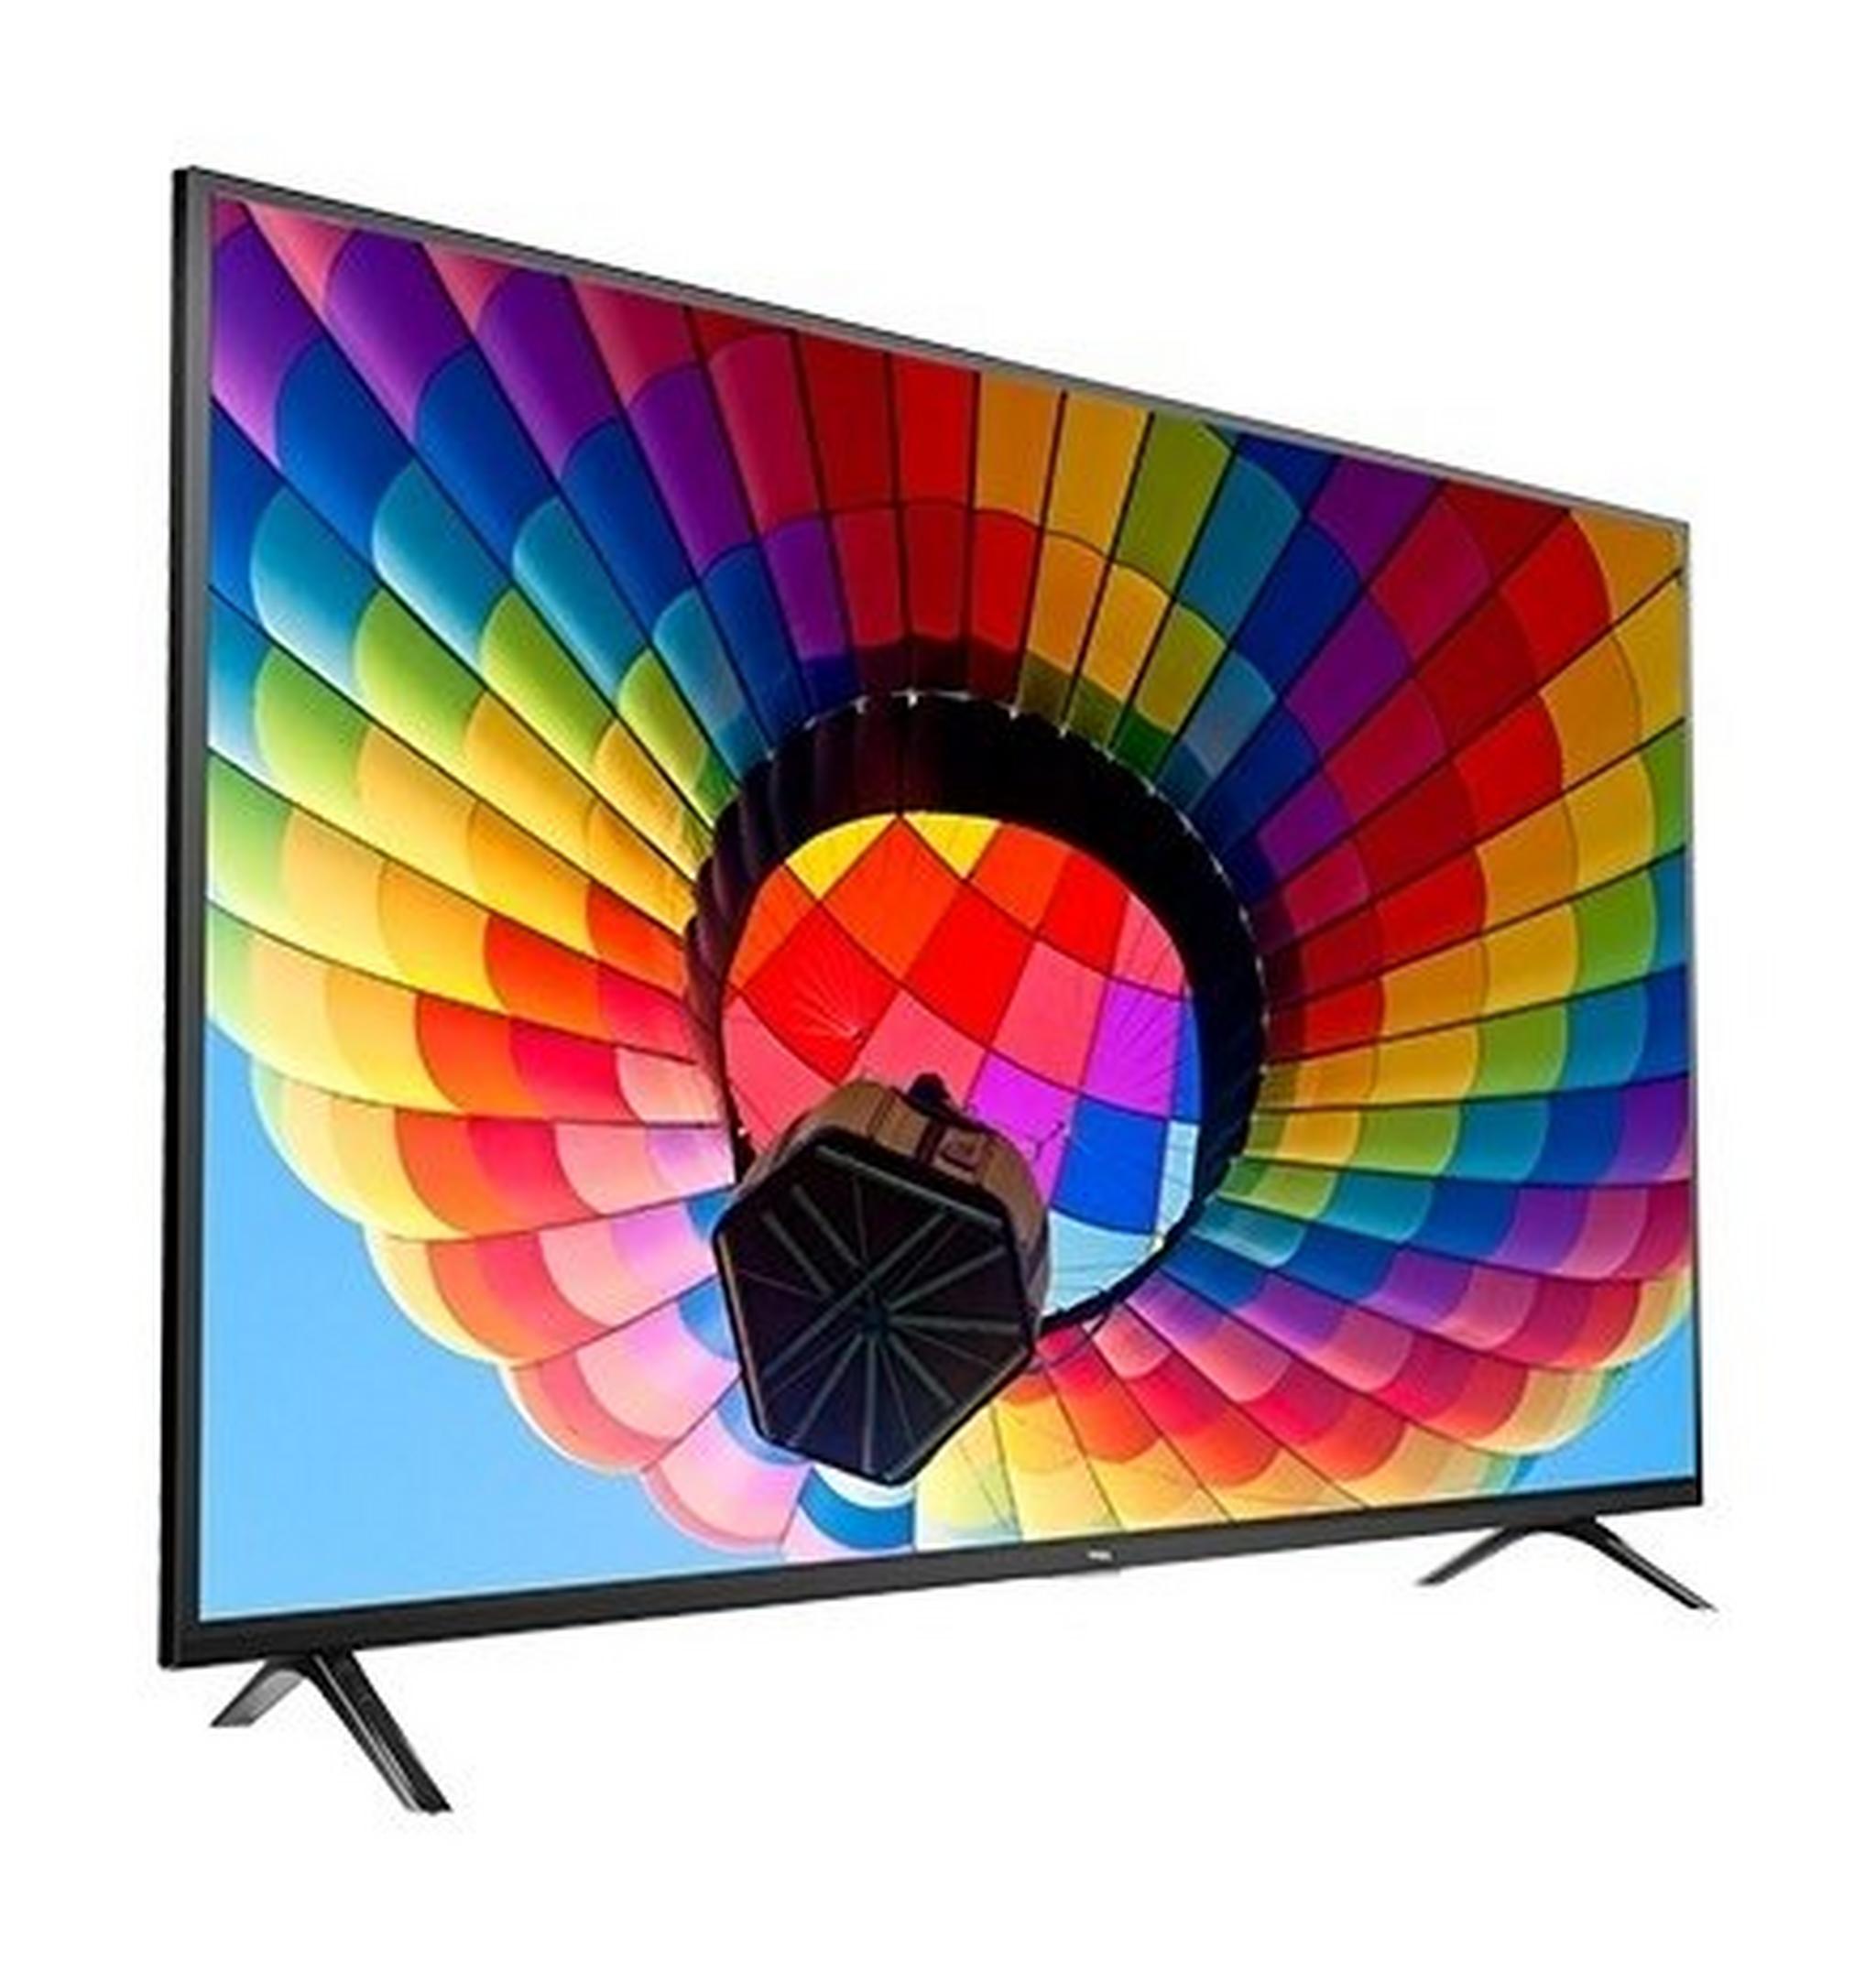 TCL D3000 Series 40 Inch FHD LED TV